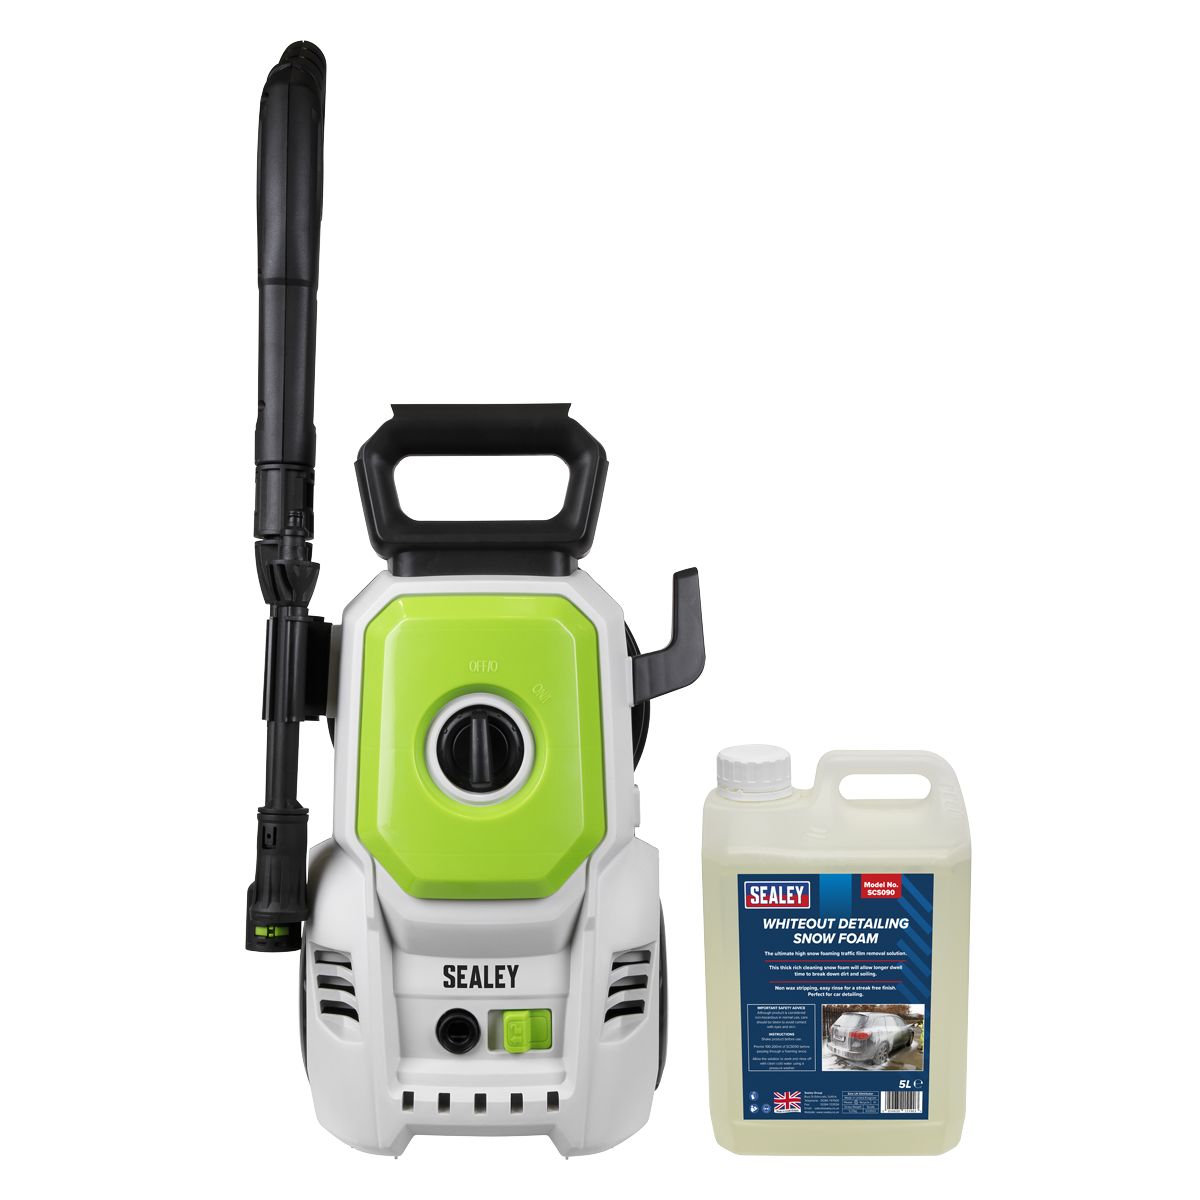 Sealey PW1610COMBO Pressure Washer 230V/1200W with Snow Foam